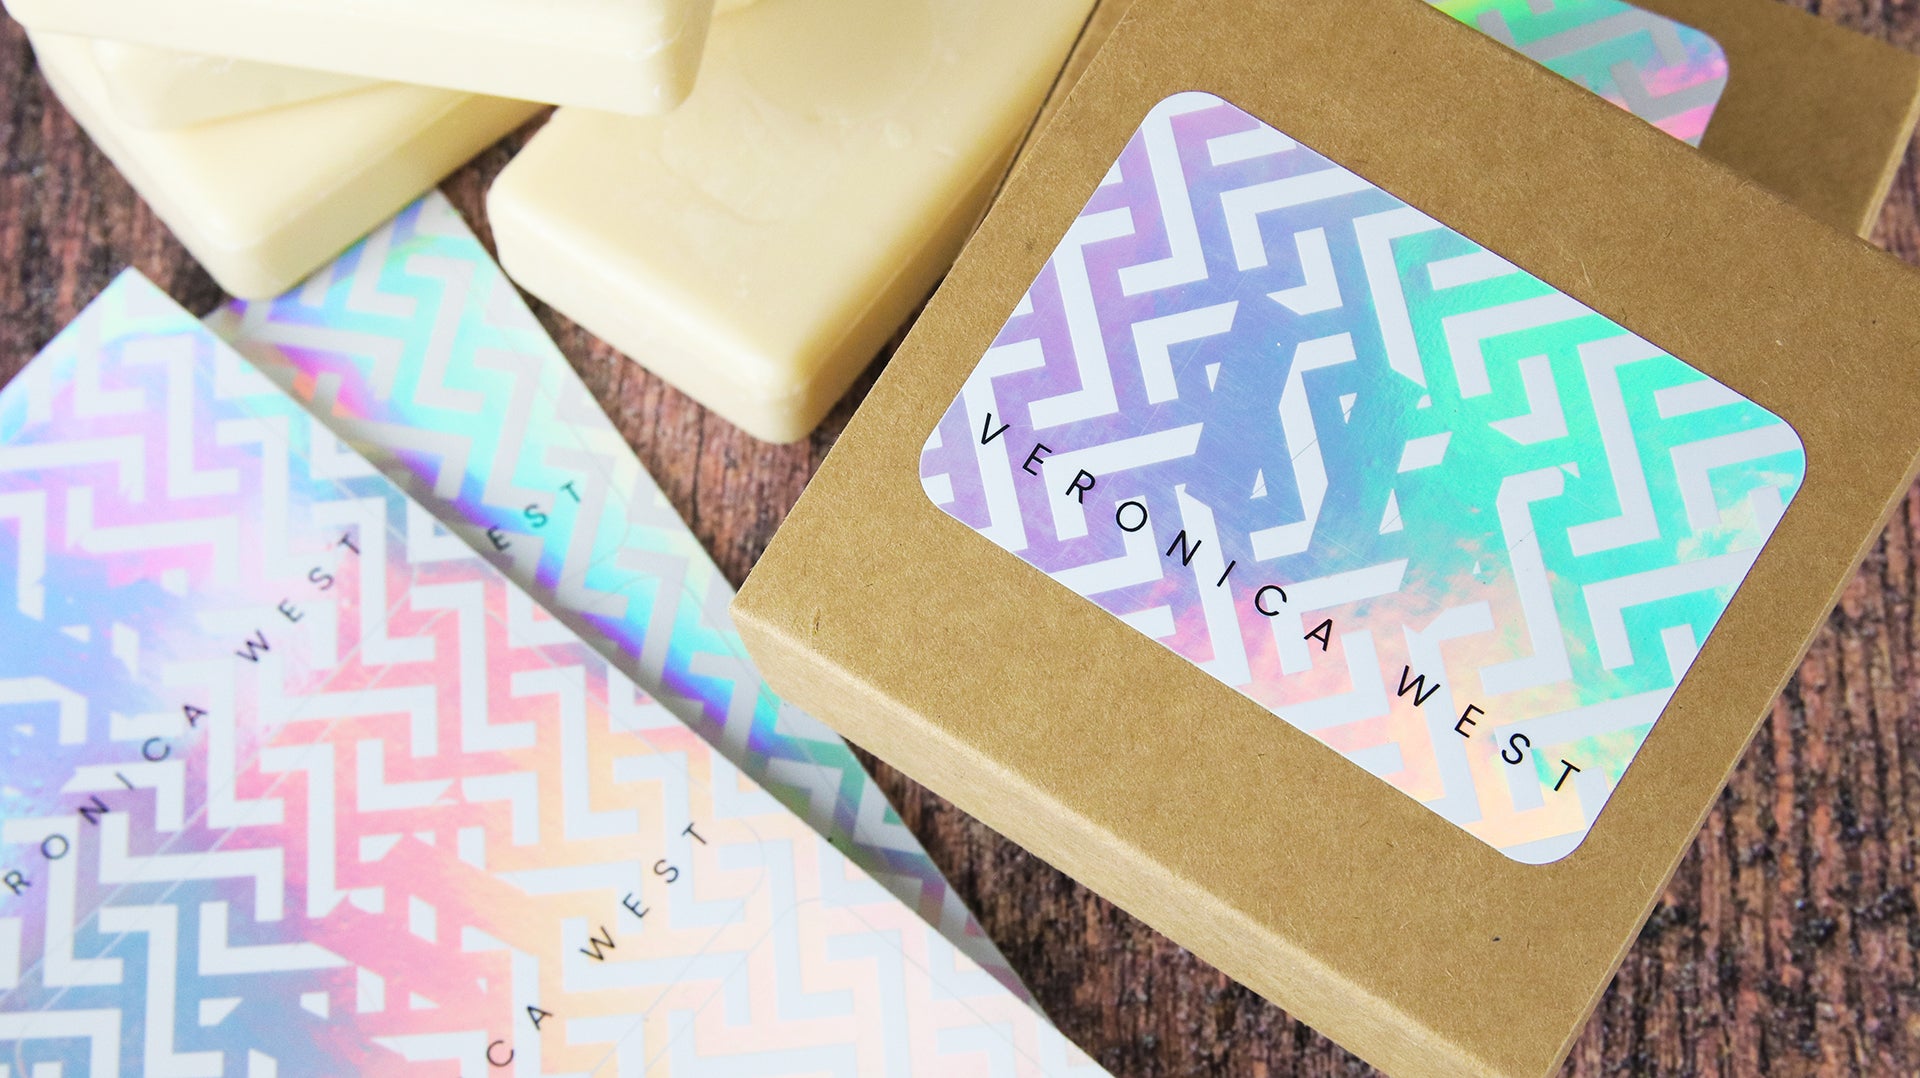 Rounded corner holographic personalised labels with victoria west logo applied to cardboard soap boxes